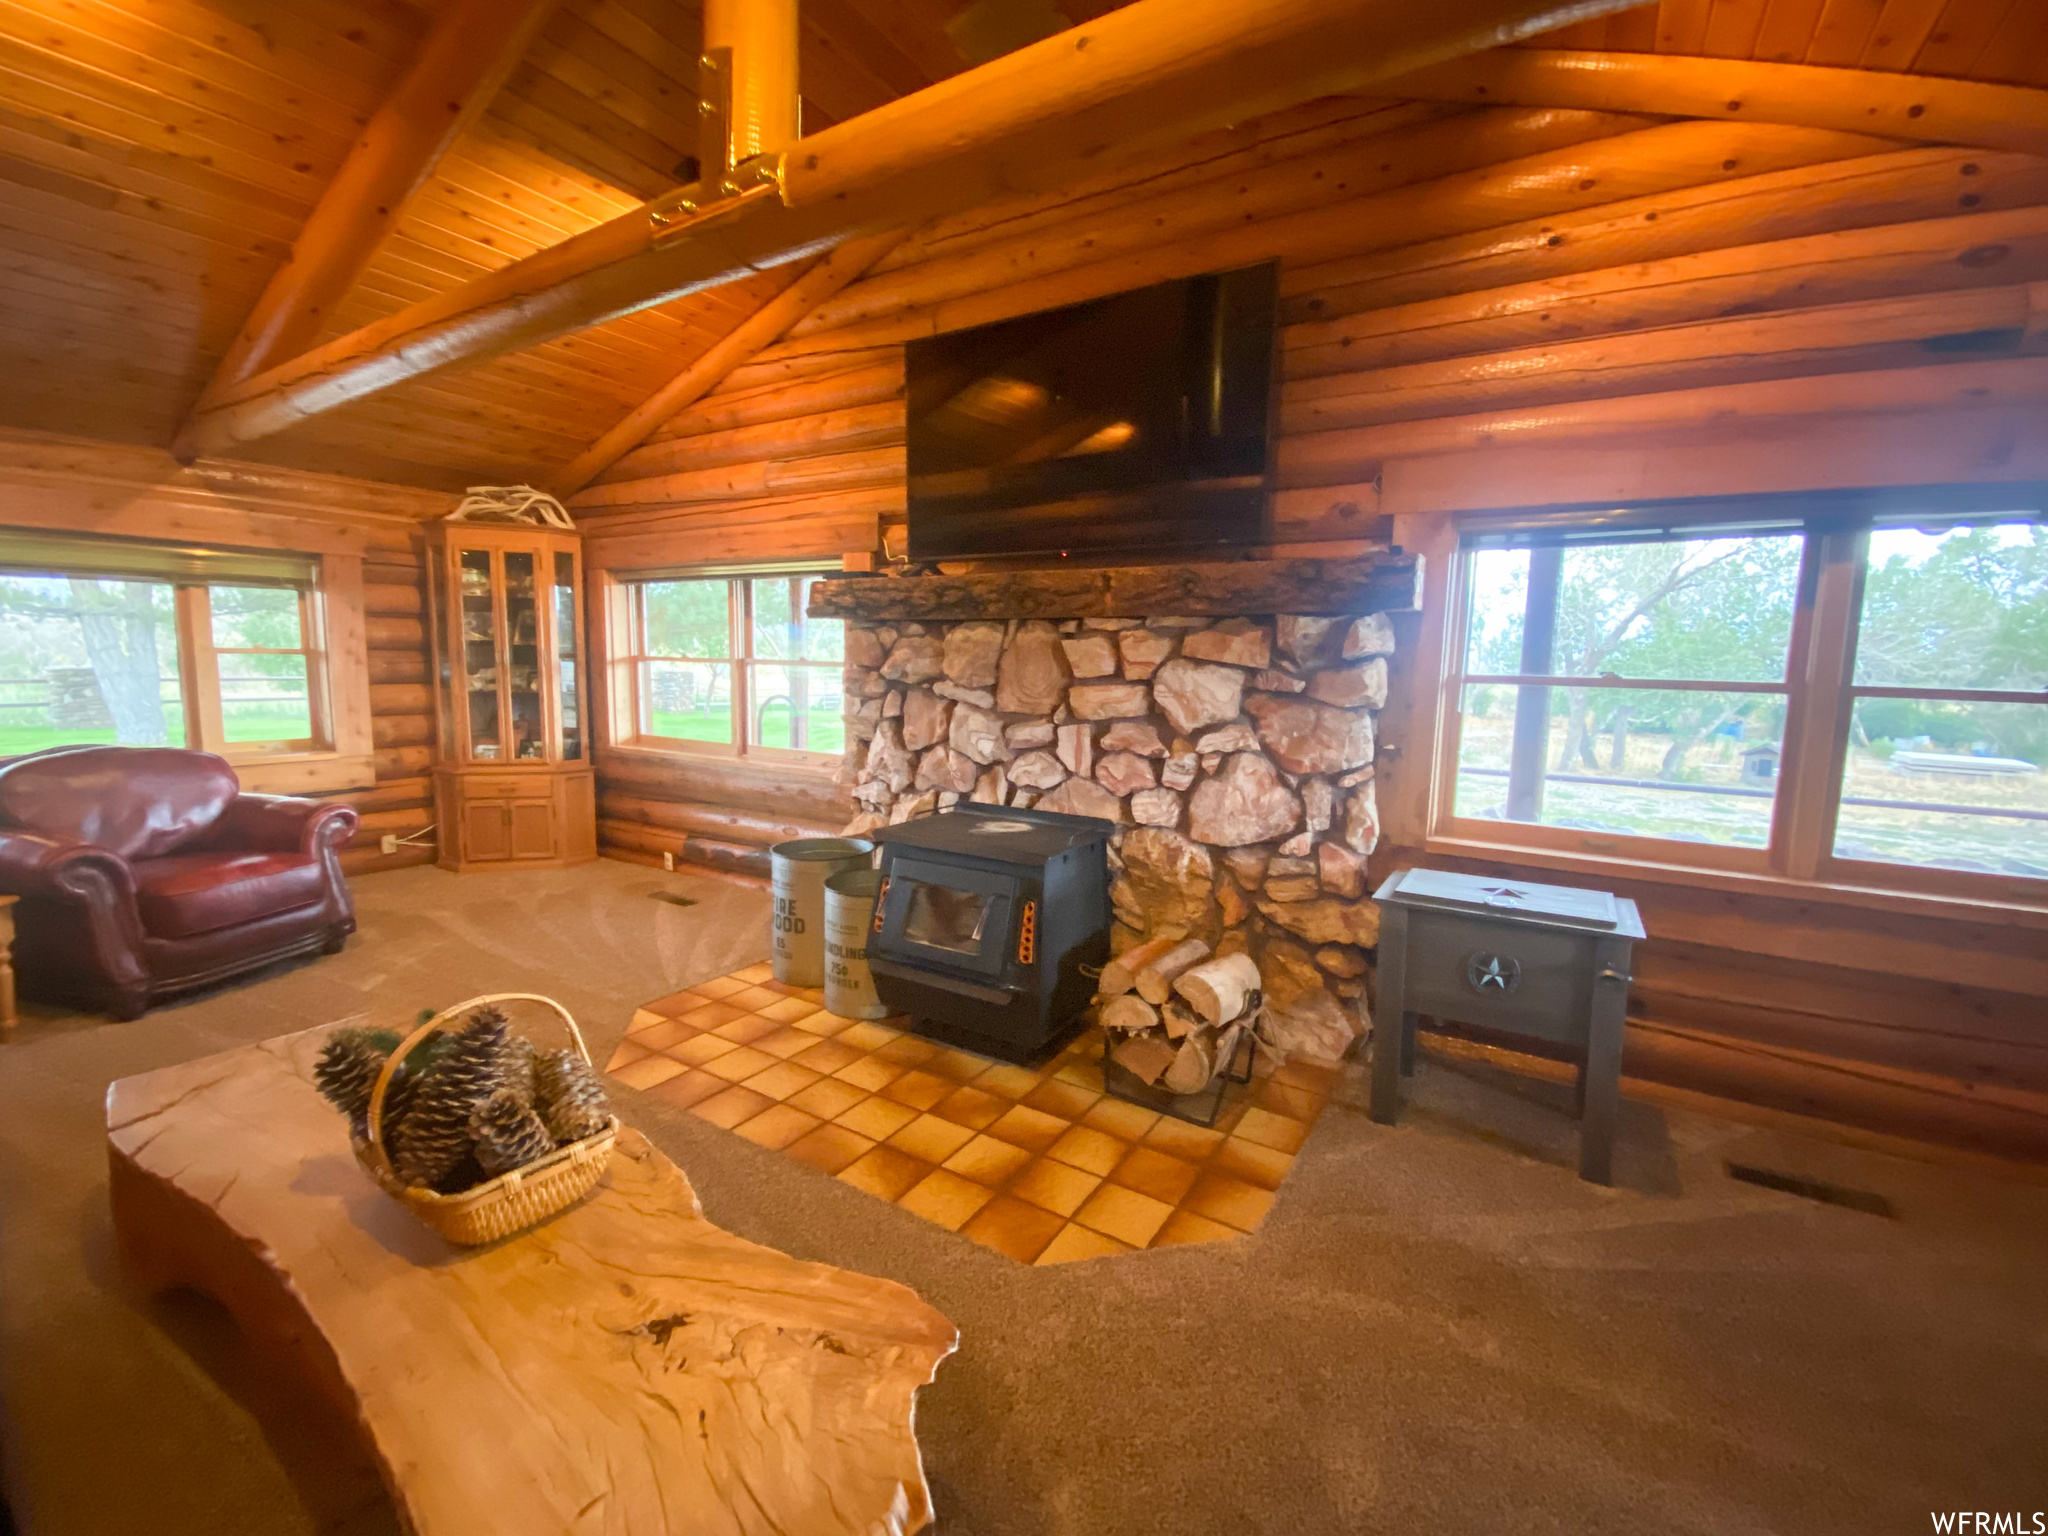 Unfurnished living room with wooden ceiling, log walls, carpet, a wood stove, and beam ceiling